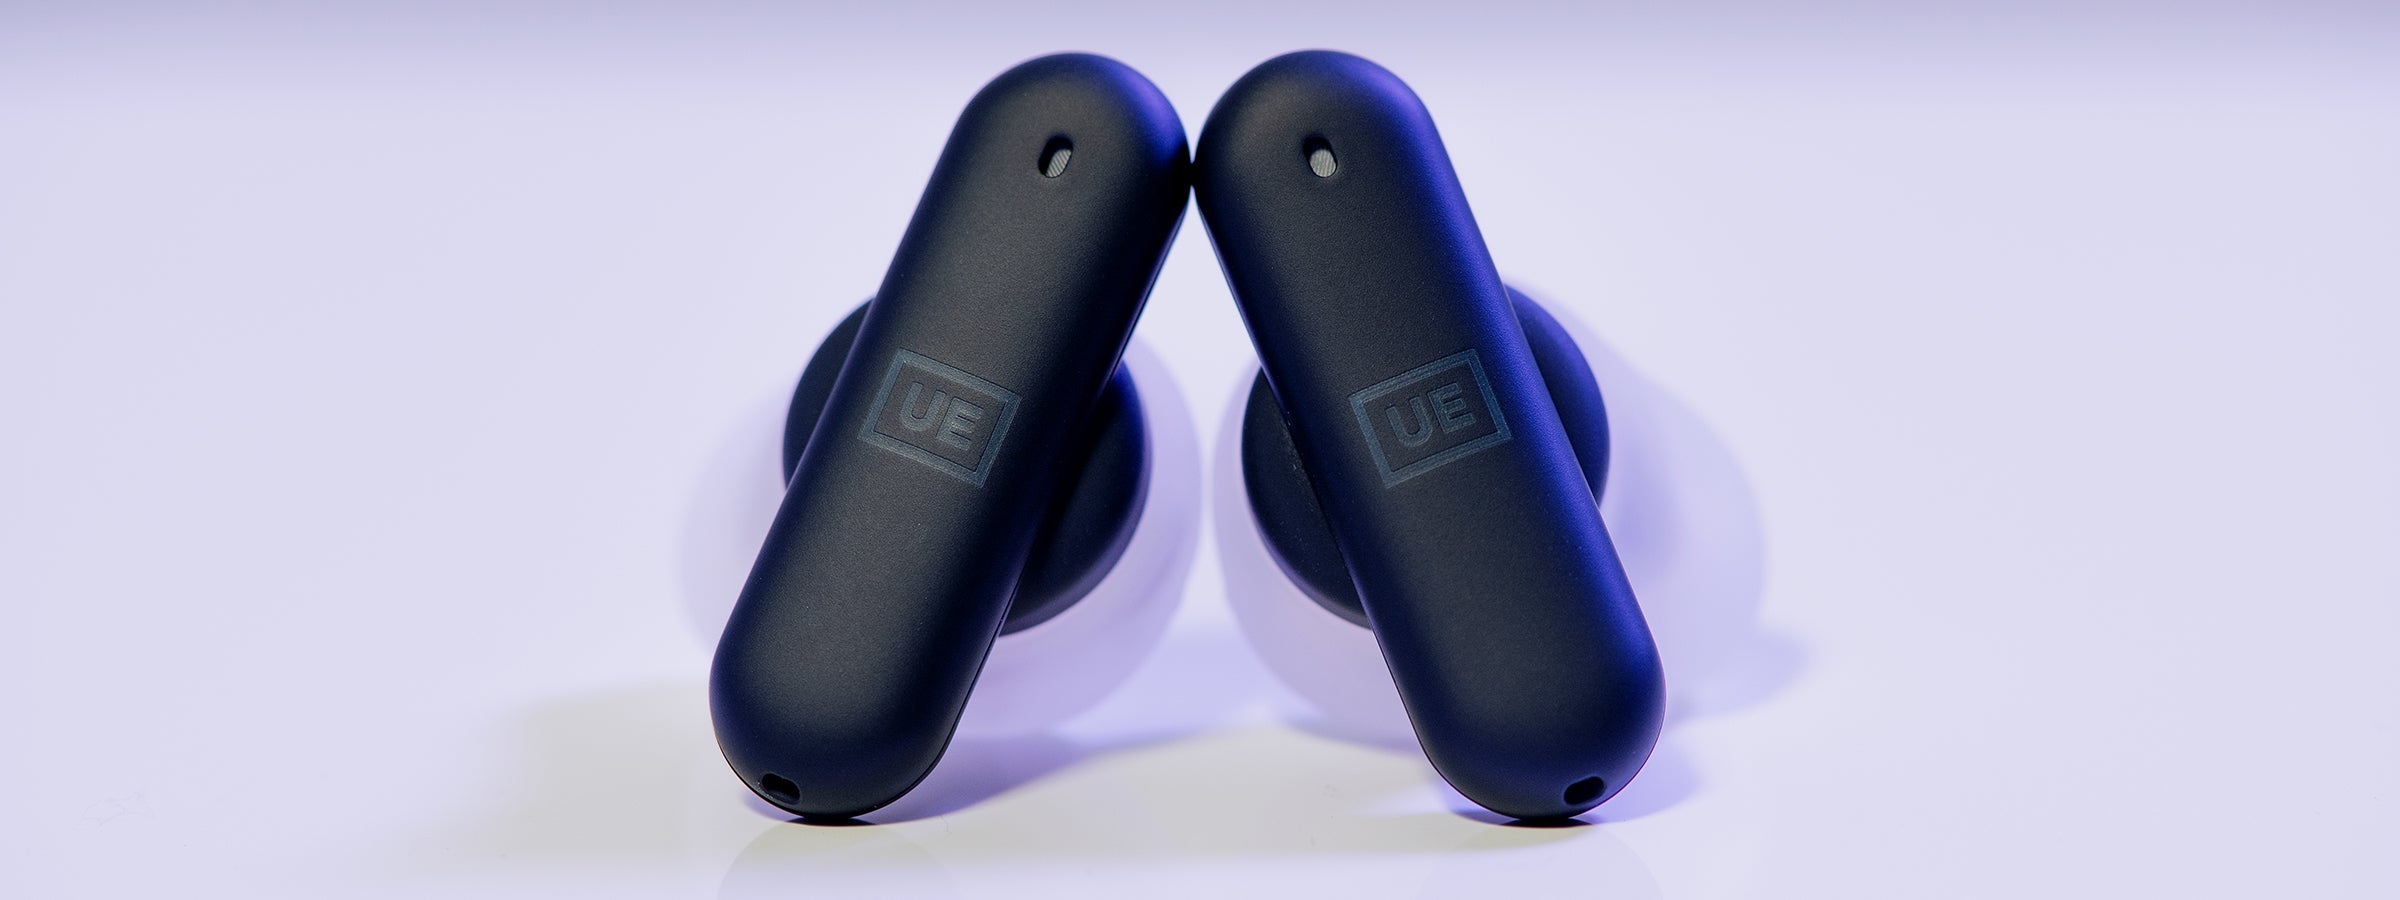 Custom-Fitted Earbuds in 60 Seconds? Yes, Really.